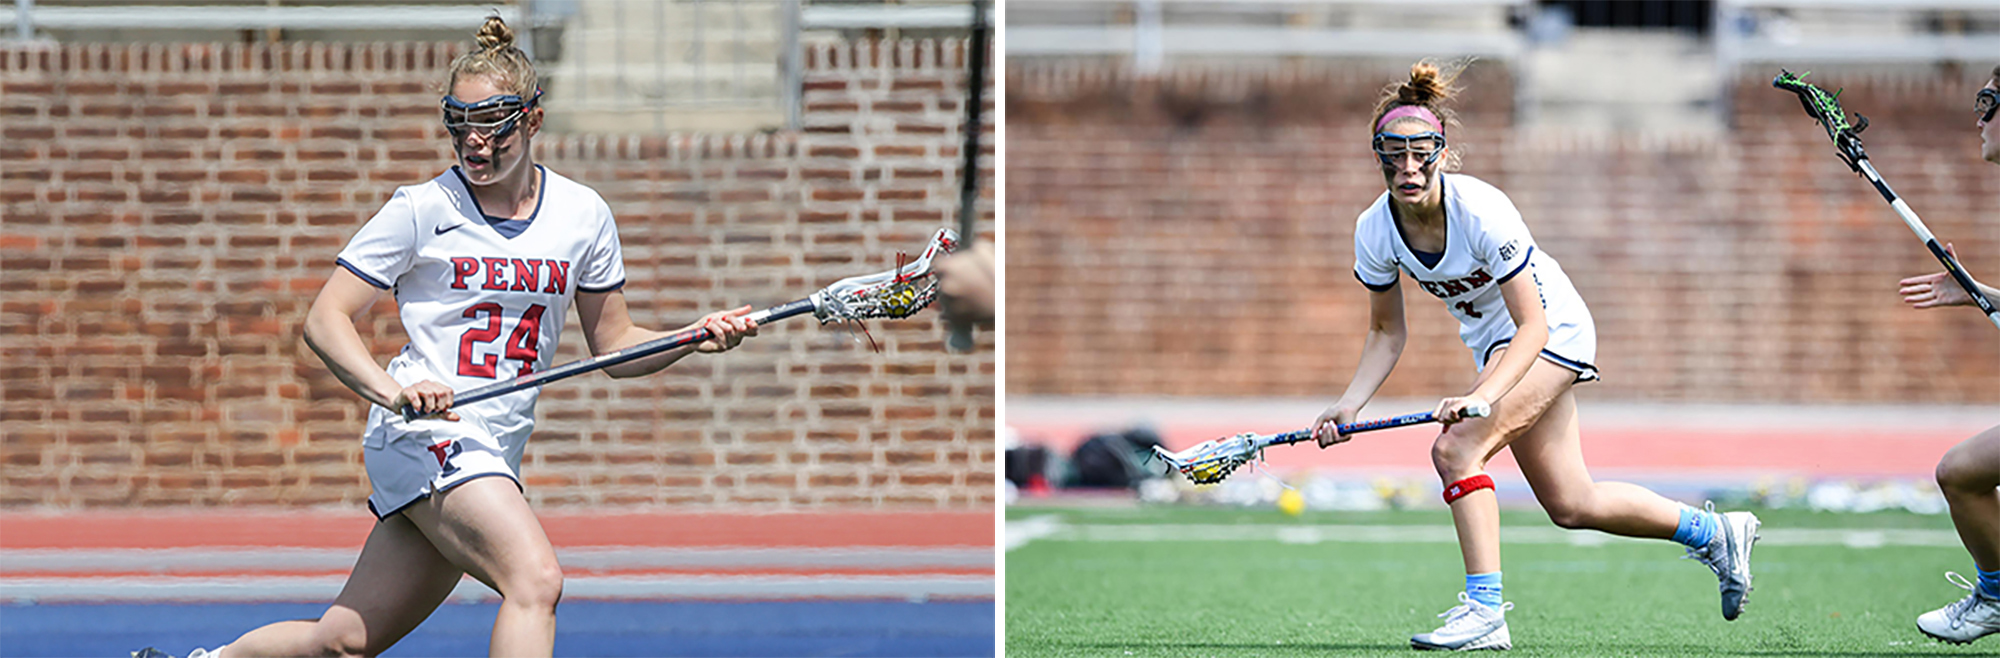 A composite of Gabby Rosenzweig, left, Abby Bosco of Penn women's lacrosse playing during a game.